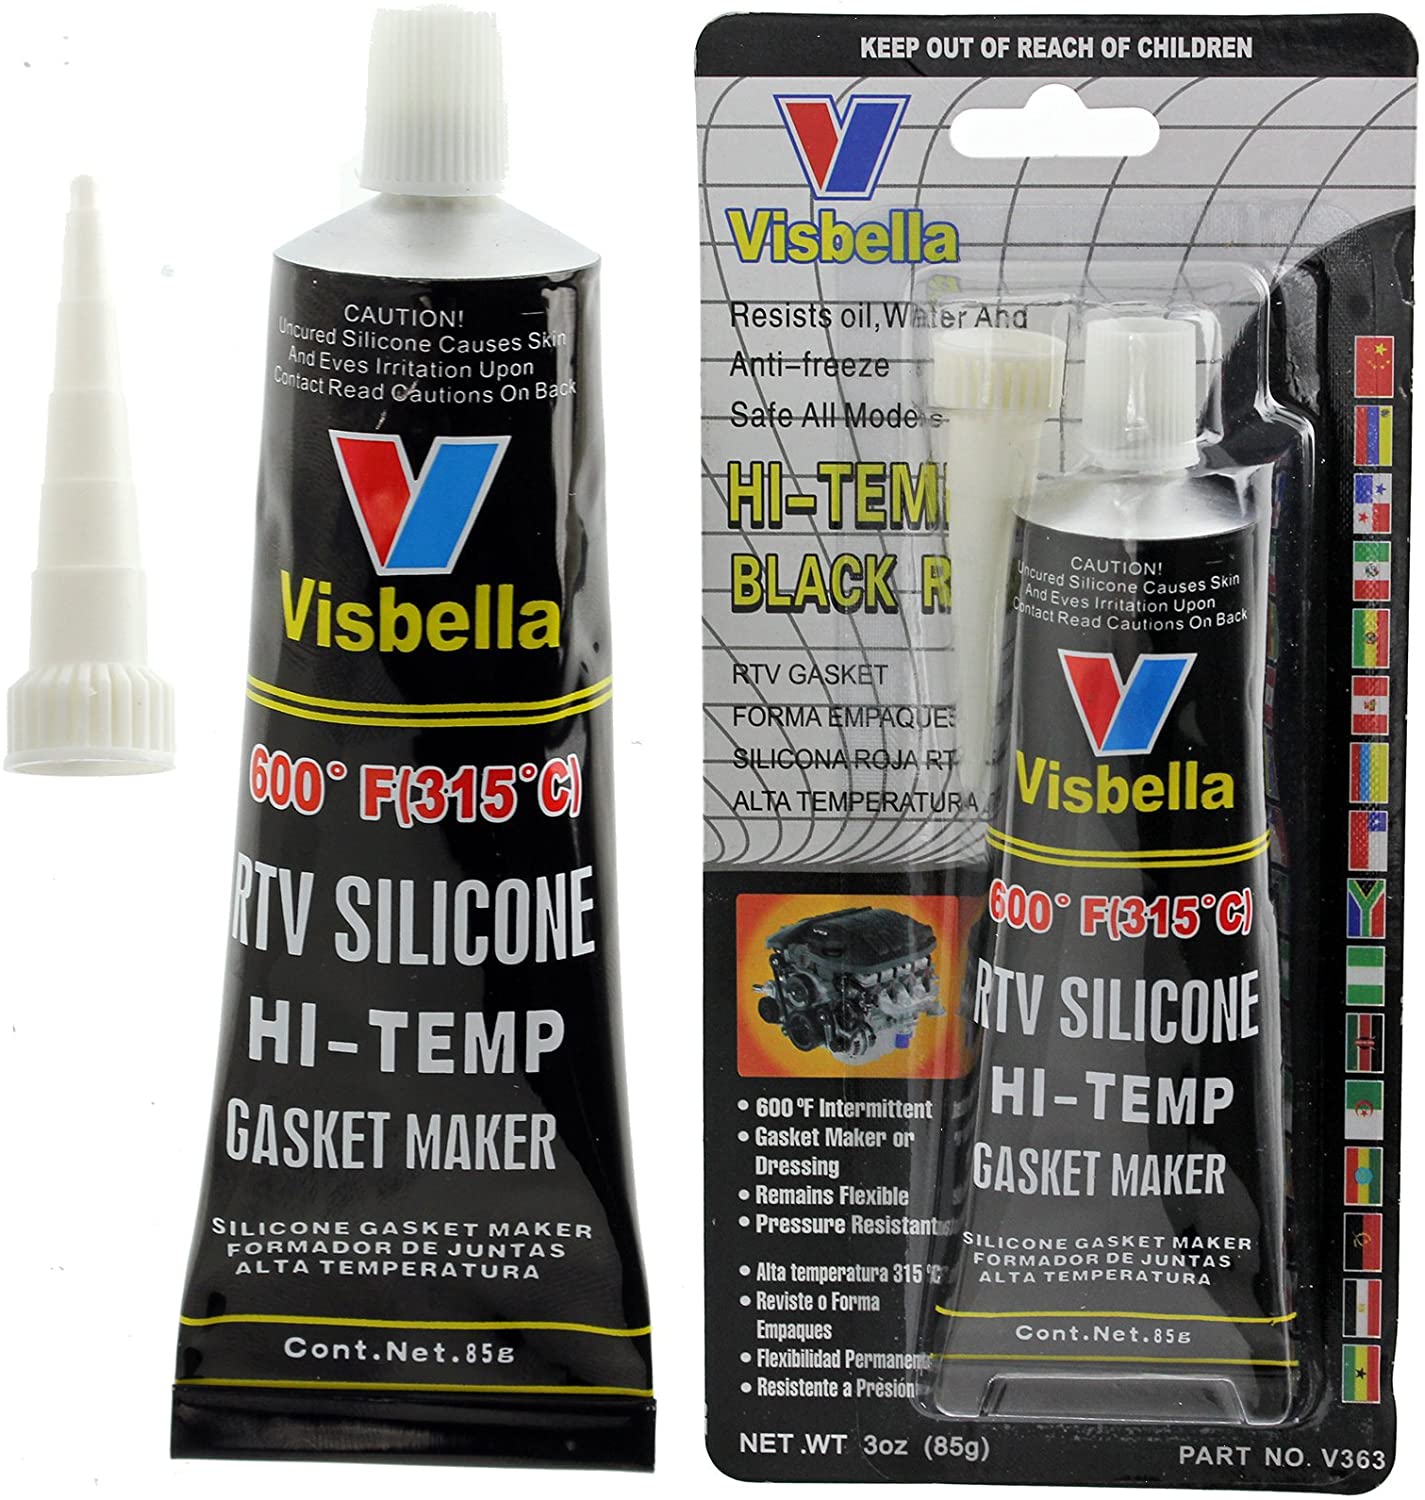 Visbella Silicone Engine Repair Gasket Seal Maker High Temperature Heat Resistant from -80ºF to 600ºF (Black)